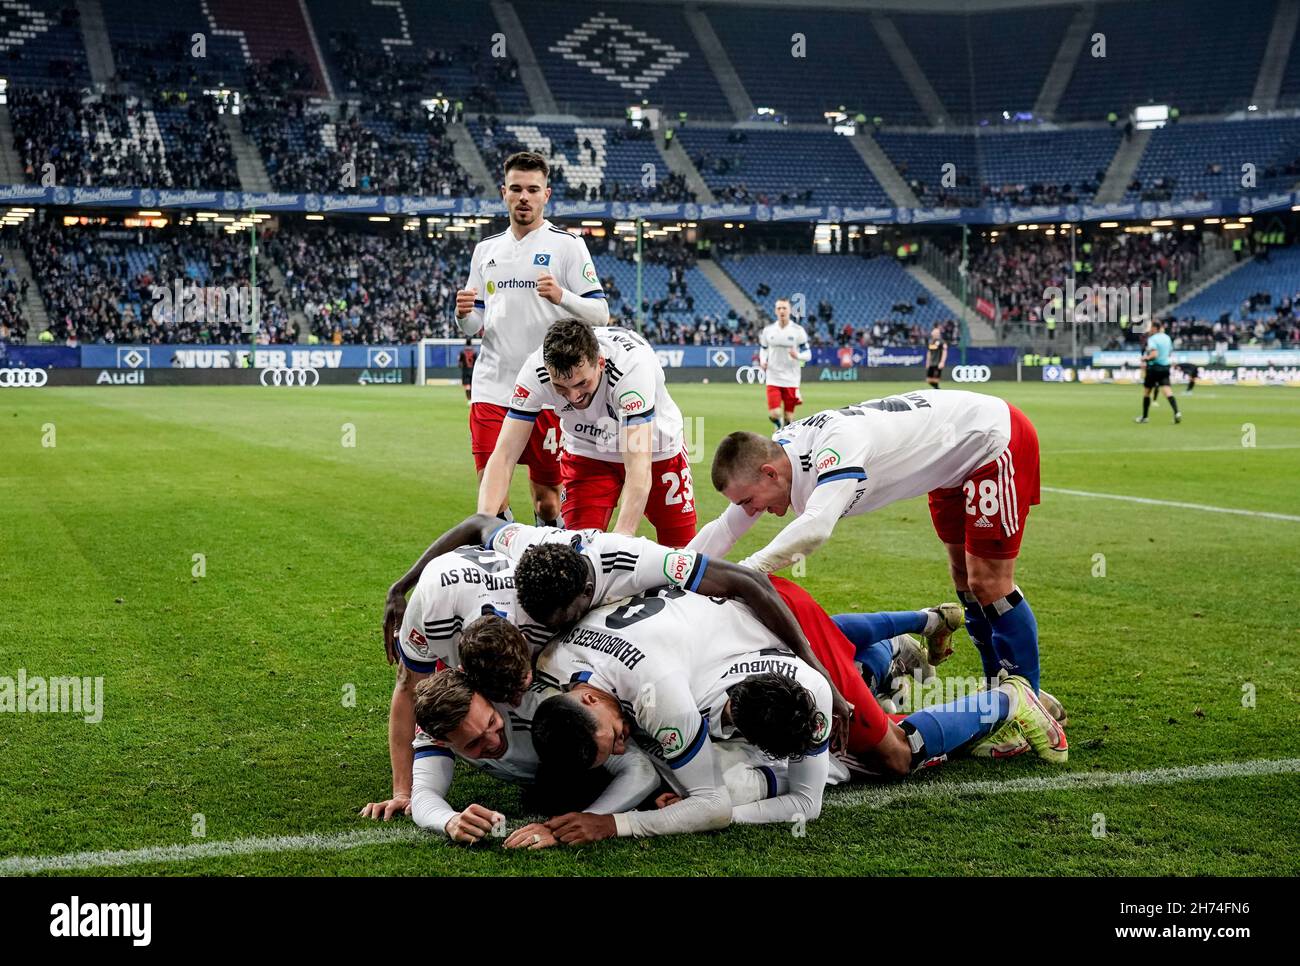 Hamburg, Germany. 20th Nov, 2021. Football: 2nd Bundesliga, Hamburger SV - Jahn Regensburg, Matchday 14, Volksparkstadion. Hamburg's players celebrate the goal to make it 2:1. Credit: Axel Heimken/dpa - IMPORTANT NOTE: In accordance with the regulations of the DFL Deutsche Fußball Liga and/or the DFB Deutscher Fußball-Bund, it is prohibited to use or have used photographs taken in the stadium and/or of the match in the form of sequence pictures and/or video-like photo series./dpa/Alamy Live News Credit: dpa picture alliance/Alamy Live News Stock Photo